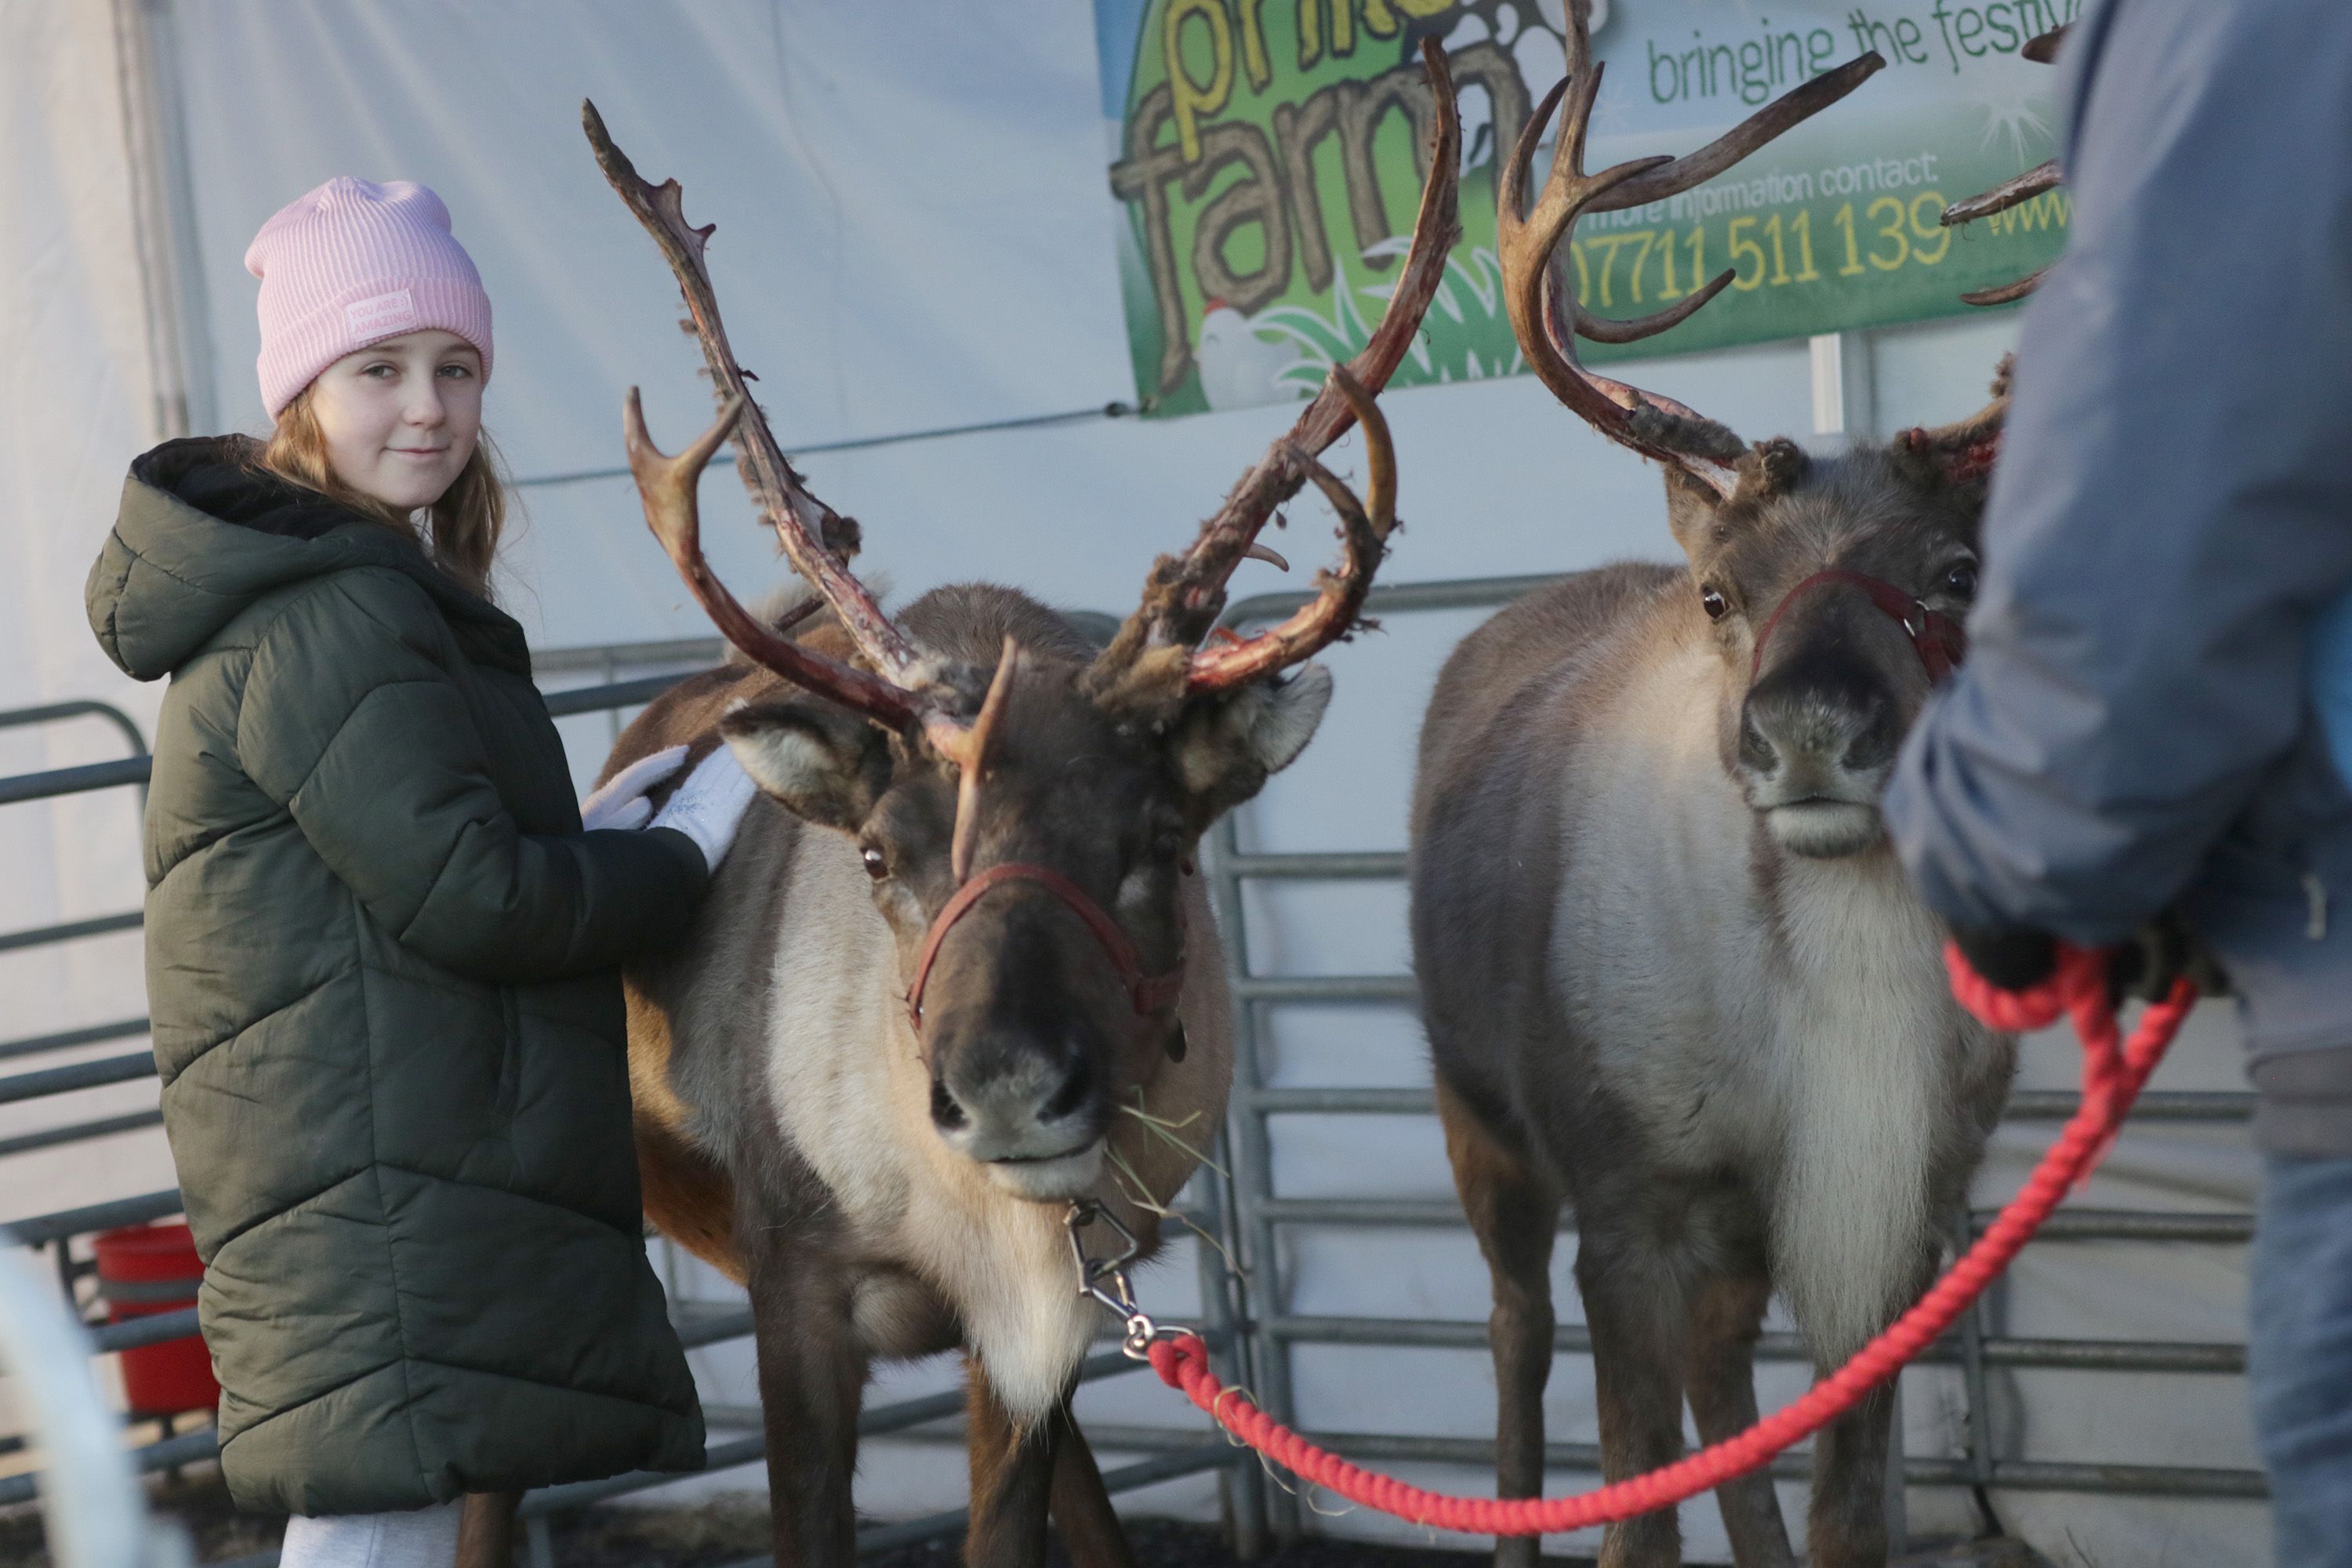 FESTIVE SPIRIT: The reindeers are sure to be a big draw at the Hannahstown Christmas Market